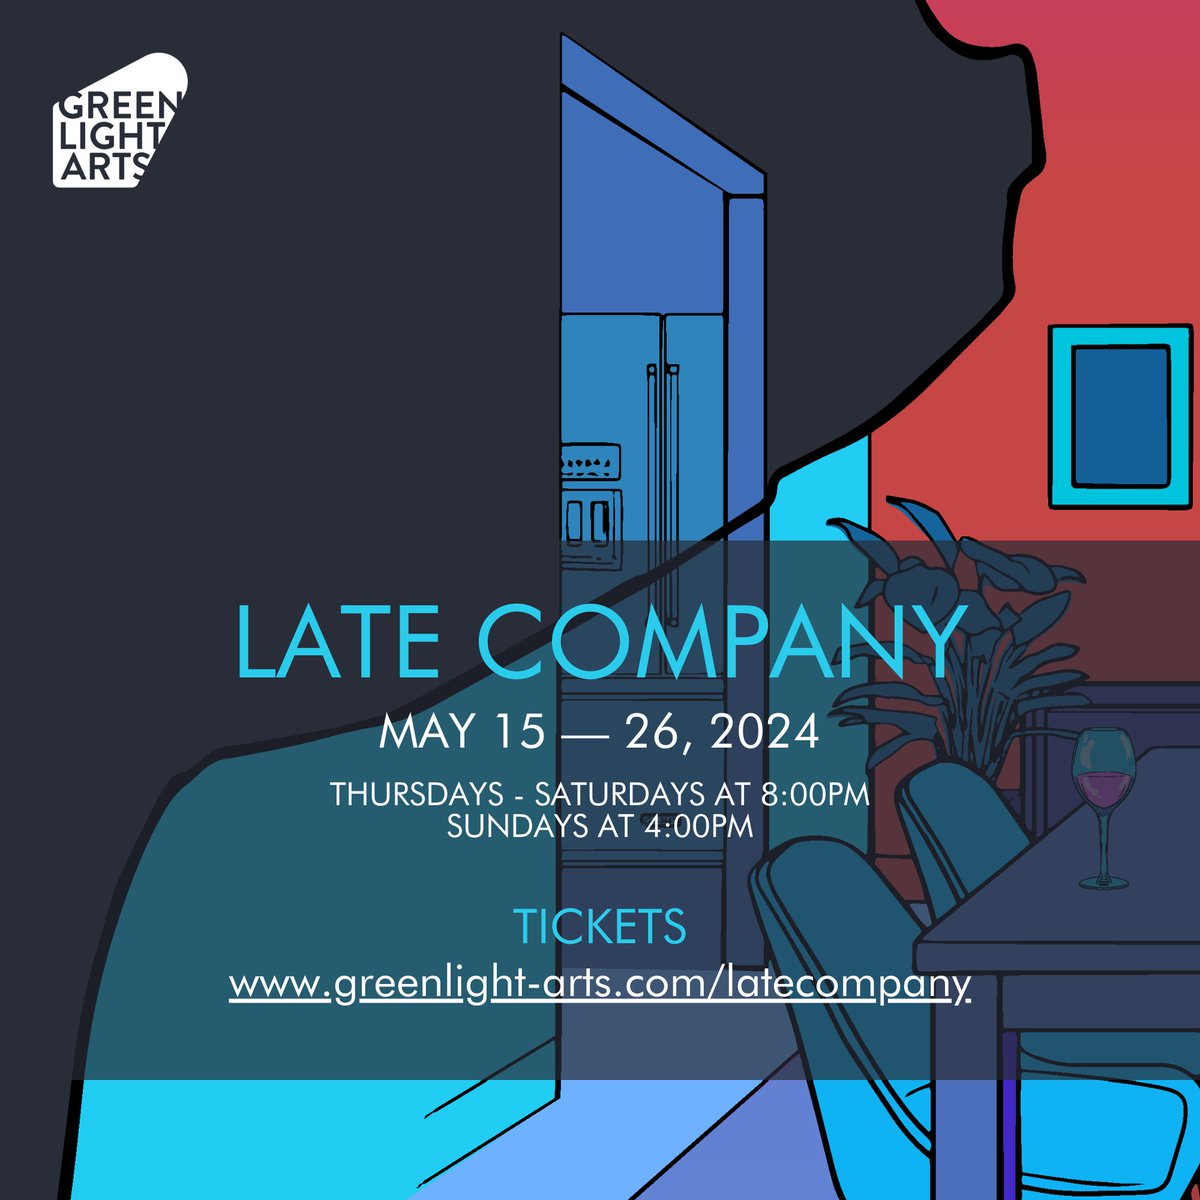 There are only 8 PUBLIC PERFORMANCES of Late Company! Get your tickets ASAP so you don't miss out! 💙greenlight-arts.com/latecompany

#LateCompany #GLATheatreCompany #kwawesome #wrawesome #dtkitchener #theatrewr #explorewr #kwfamous